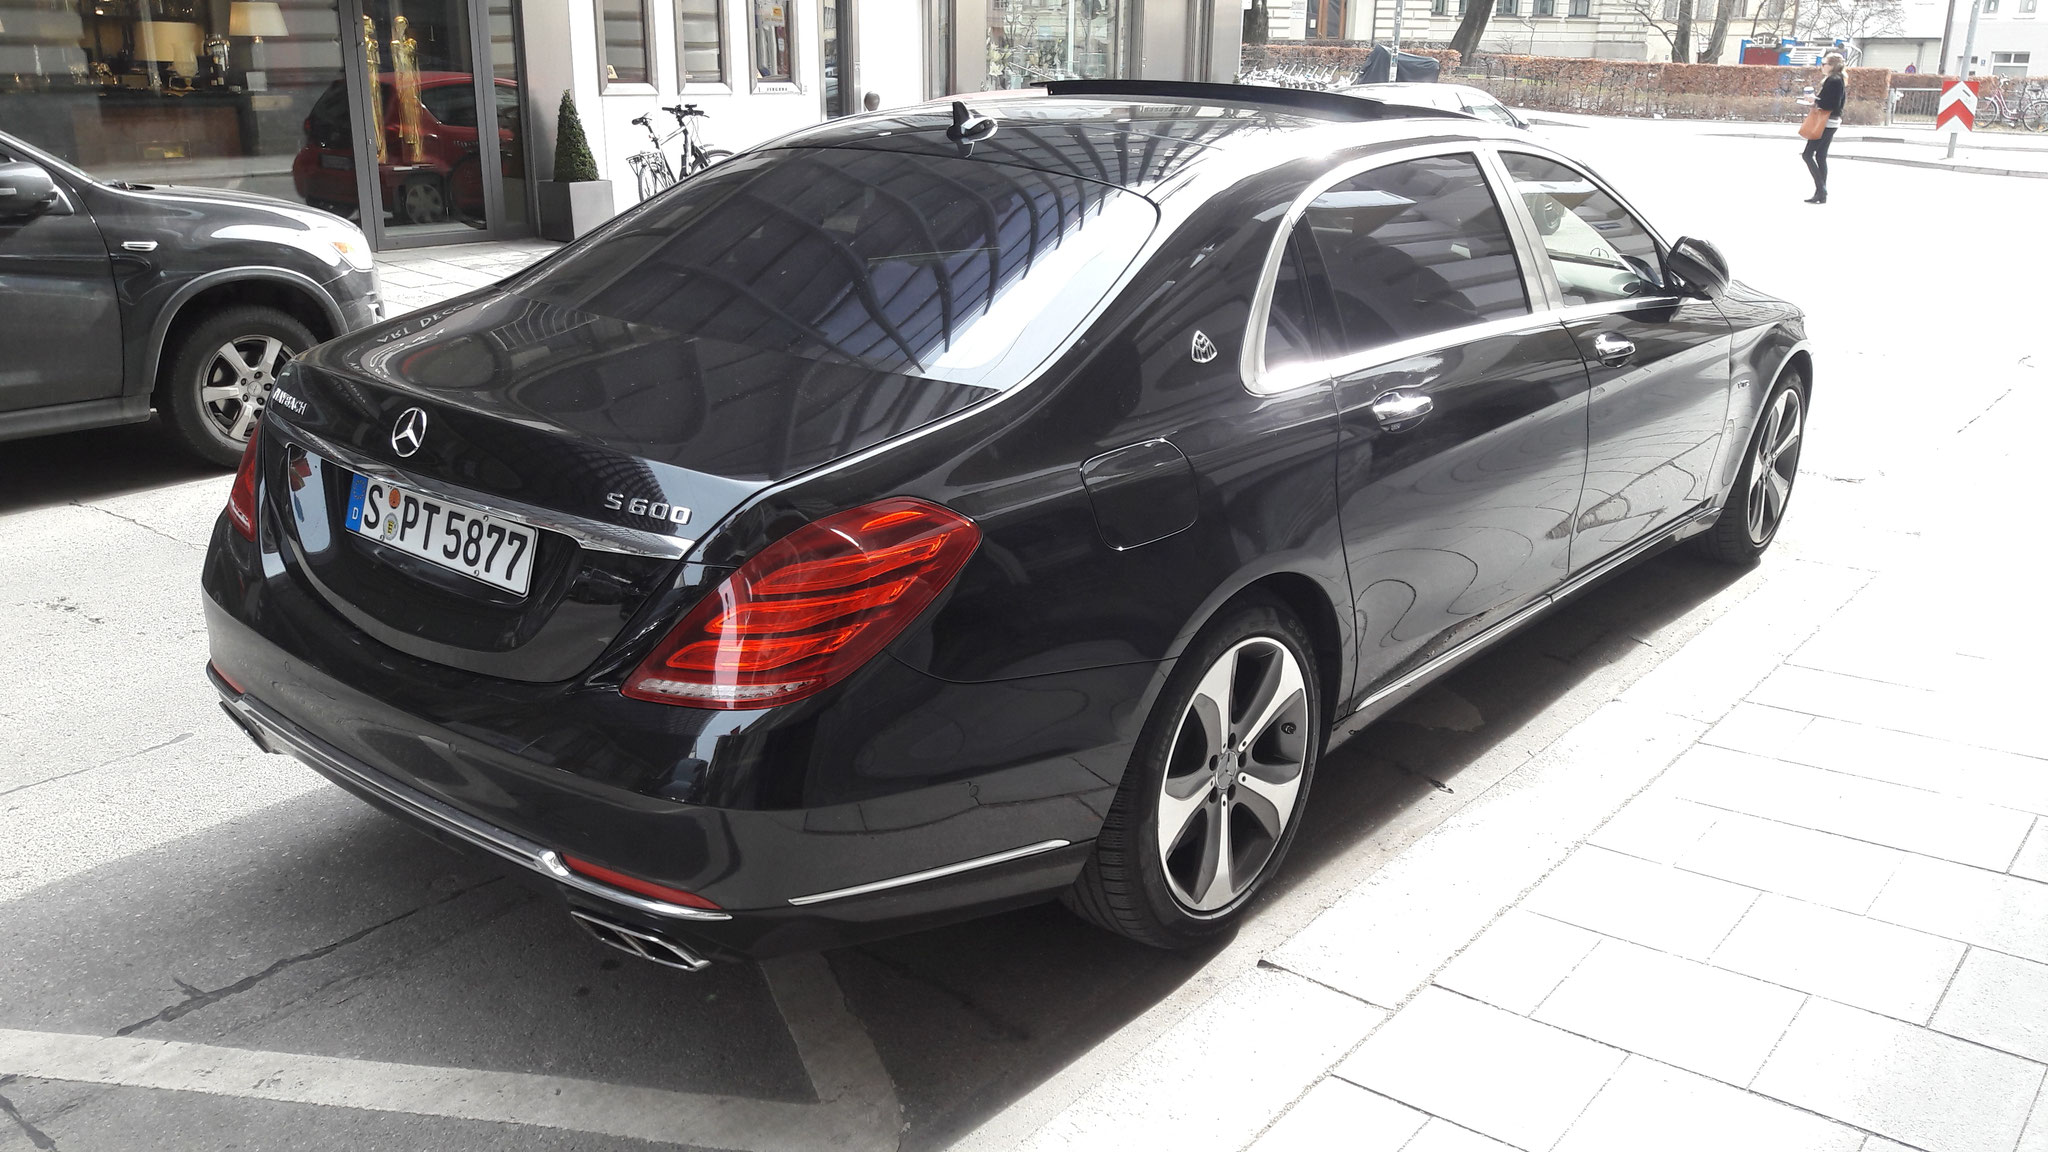 Mercedes Maybach S600 - S-PT-5877